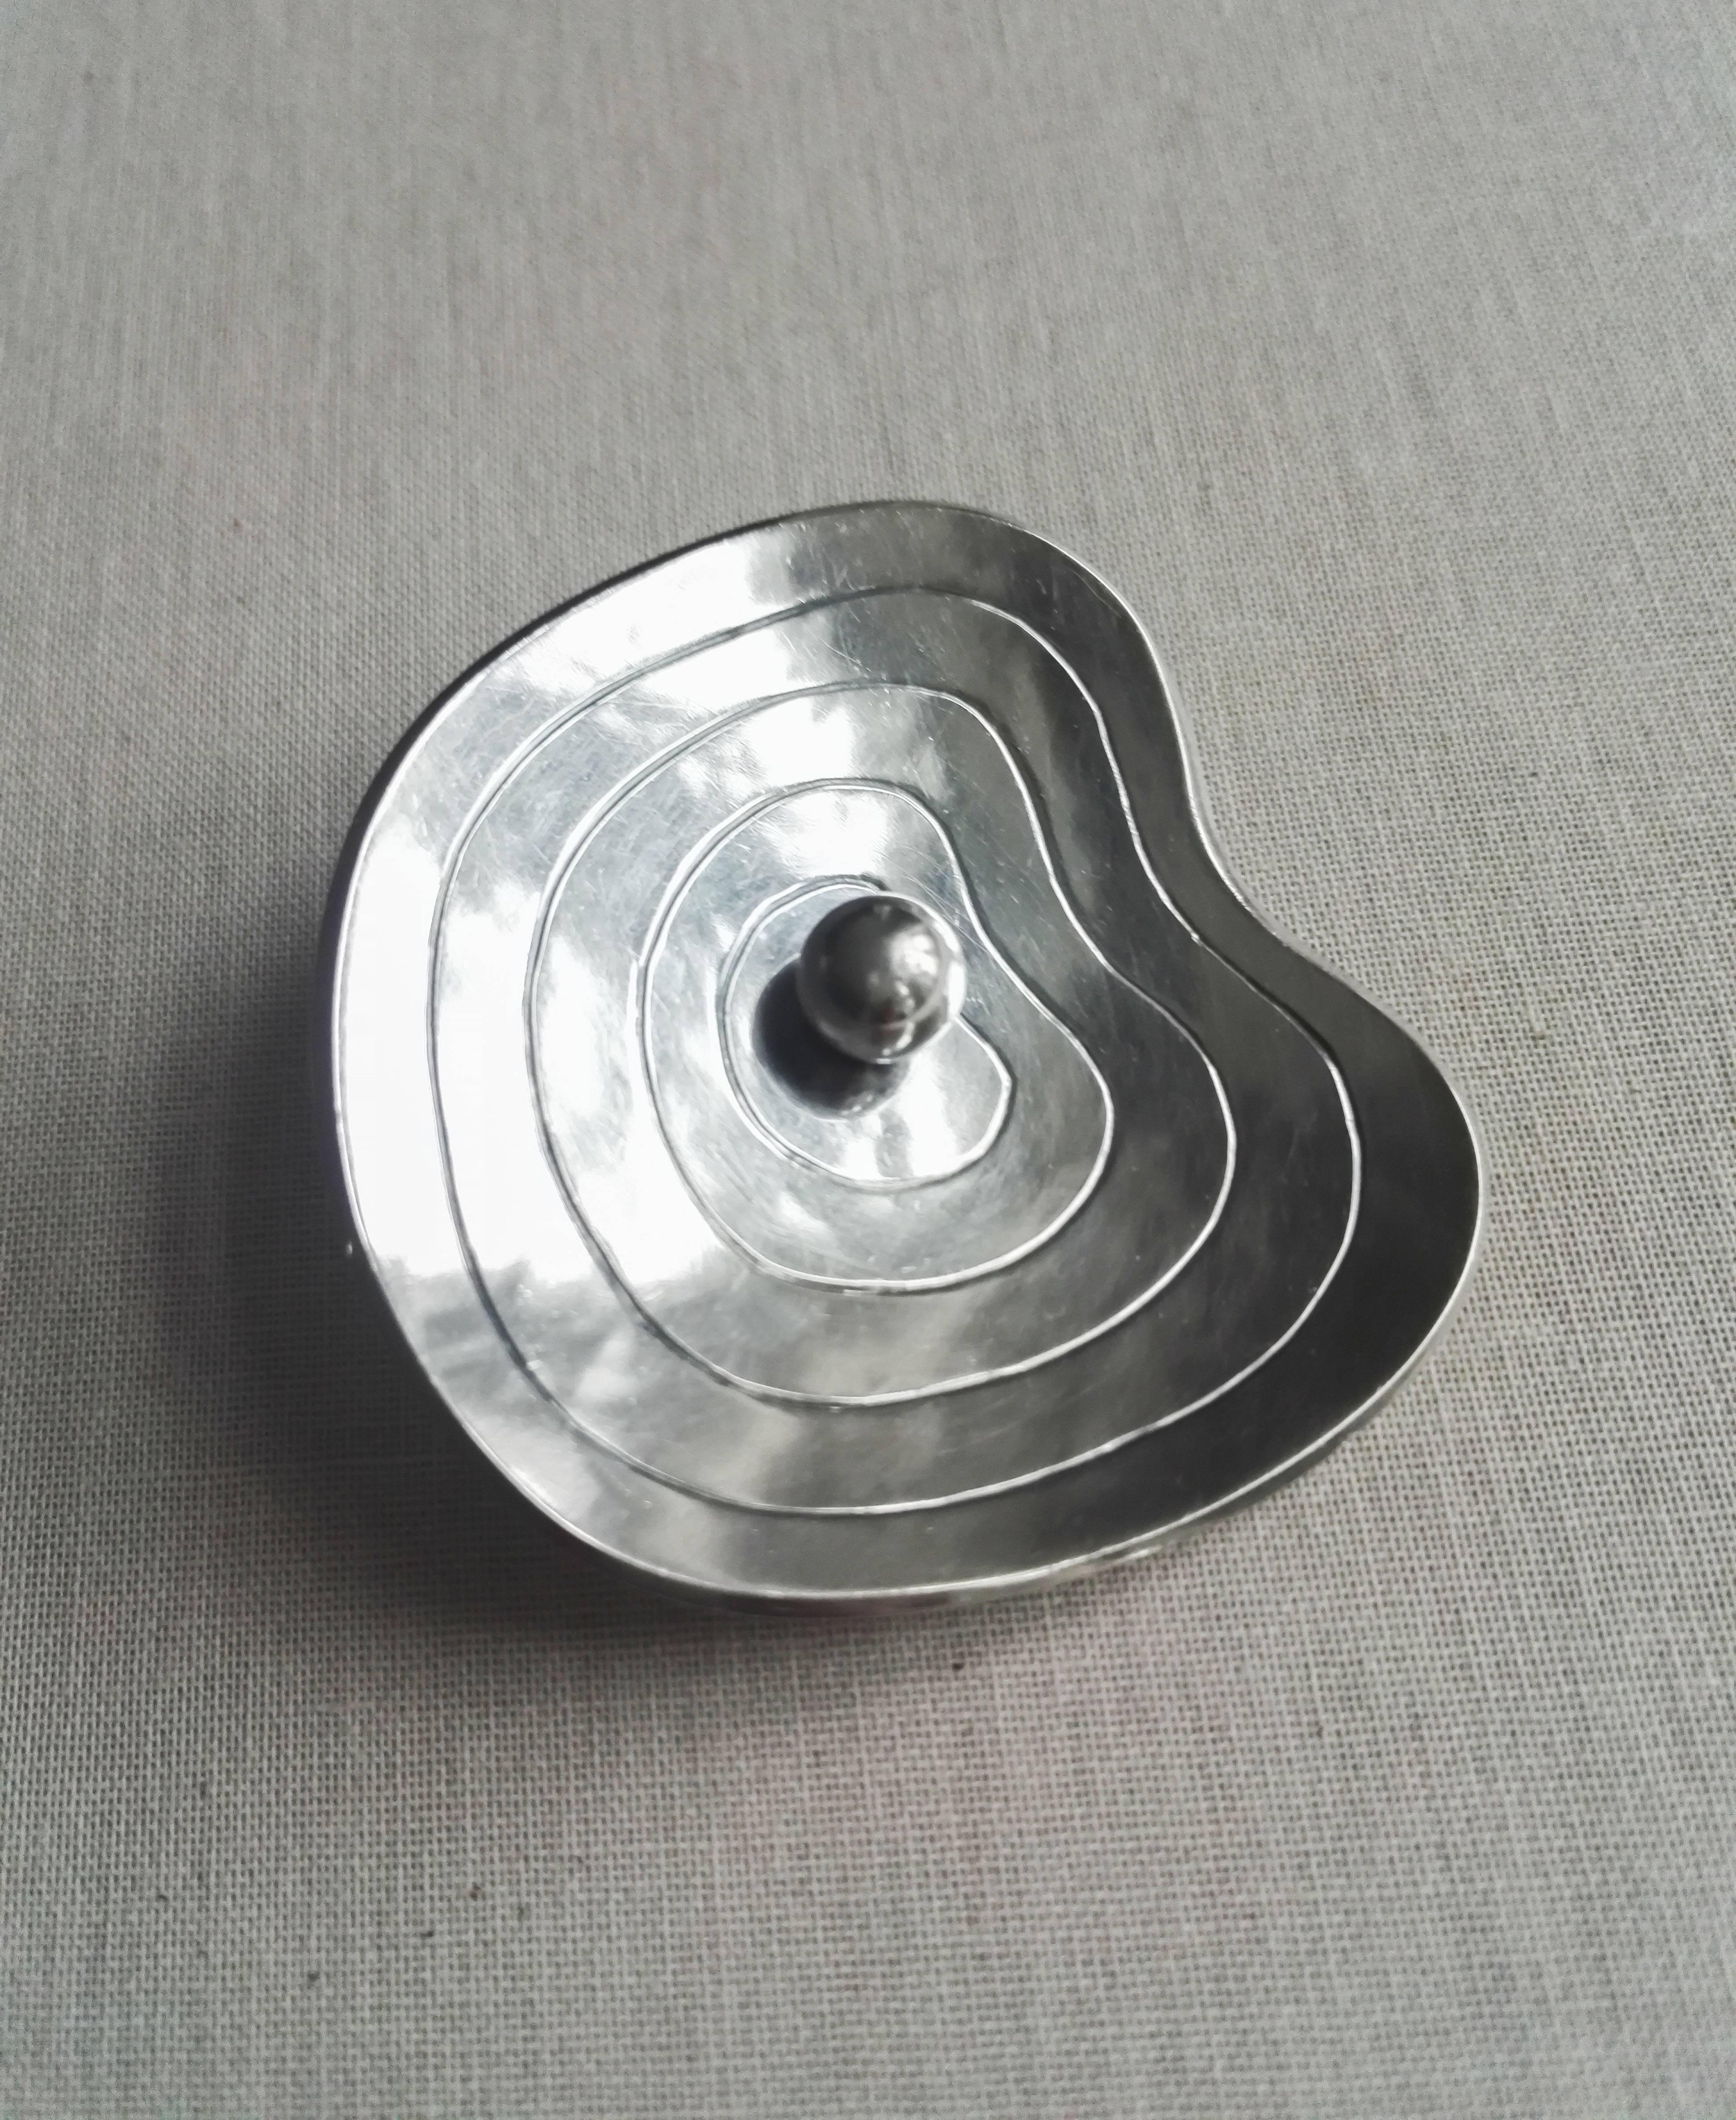 Early sterling silver brooch by renown Swedish silversmith and jewelry designer Sigurd Persson. 

Stockholm, ca 1942

Sterling Silver 

Unusual free-from shape is in interesting contrast to more geometric and straight-lined design which Sigurd